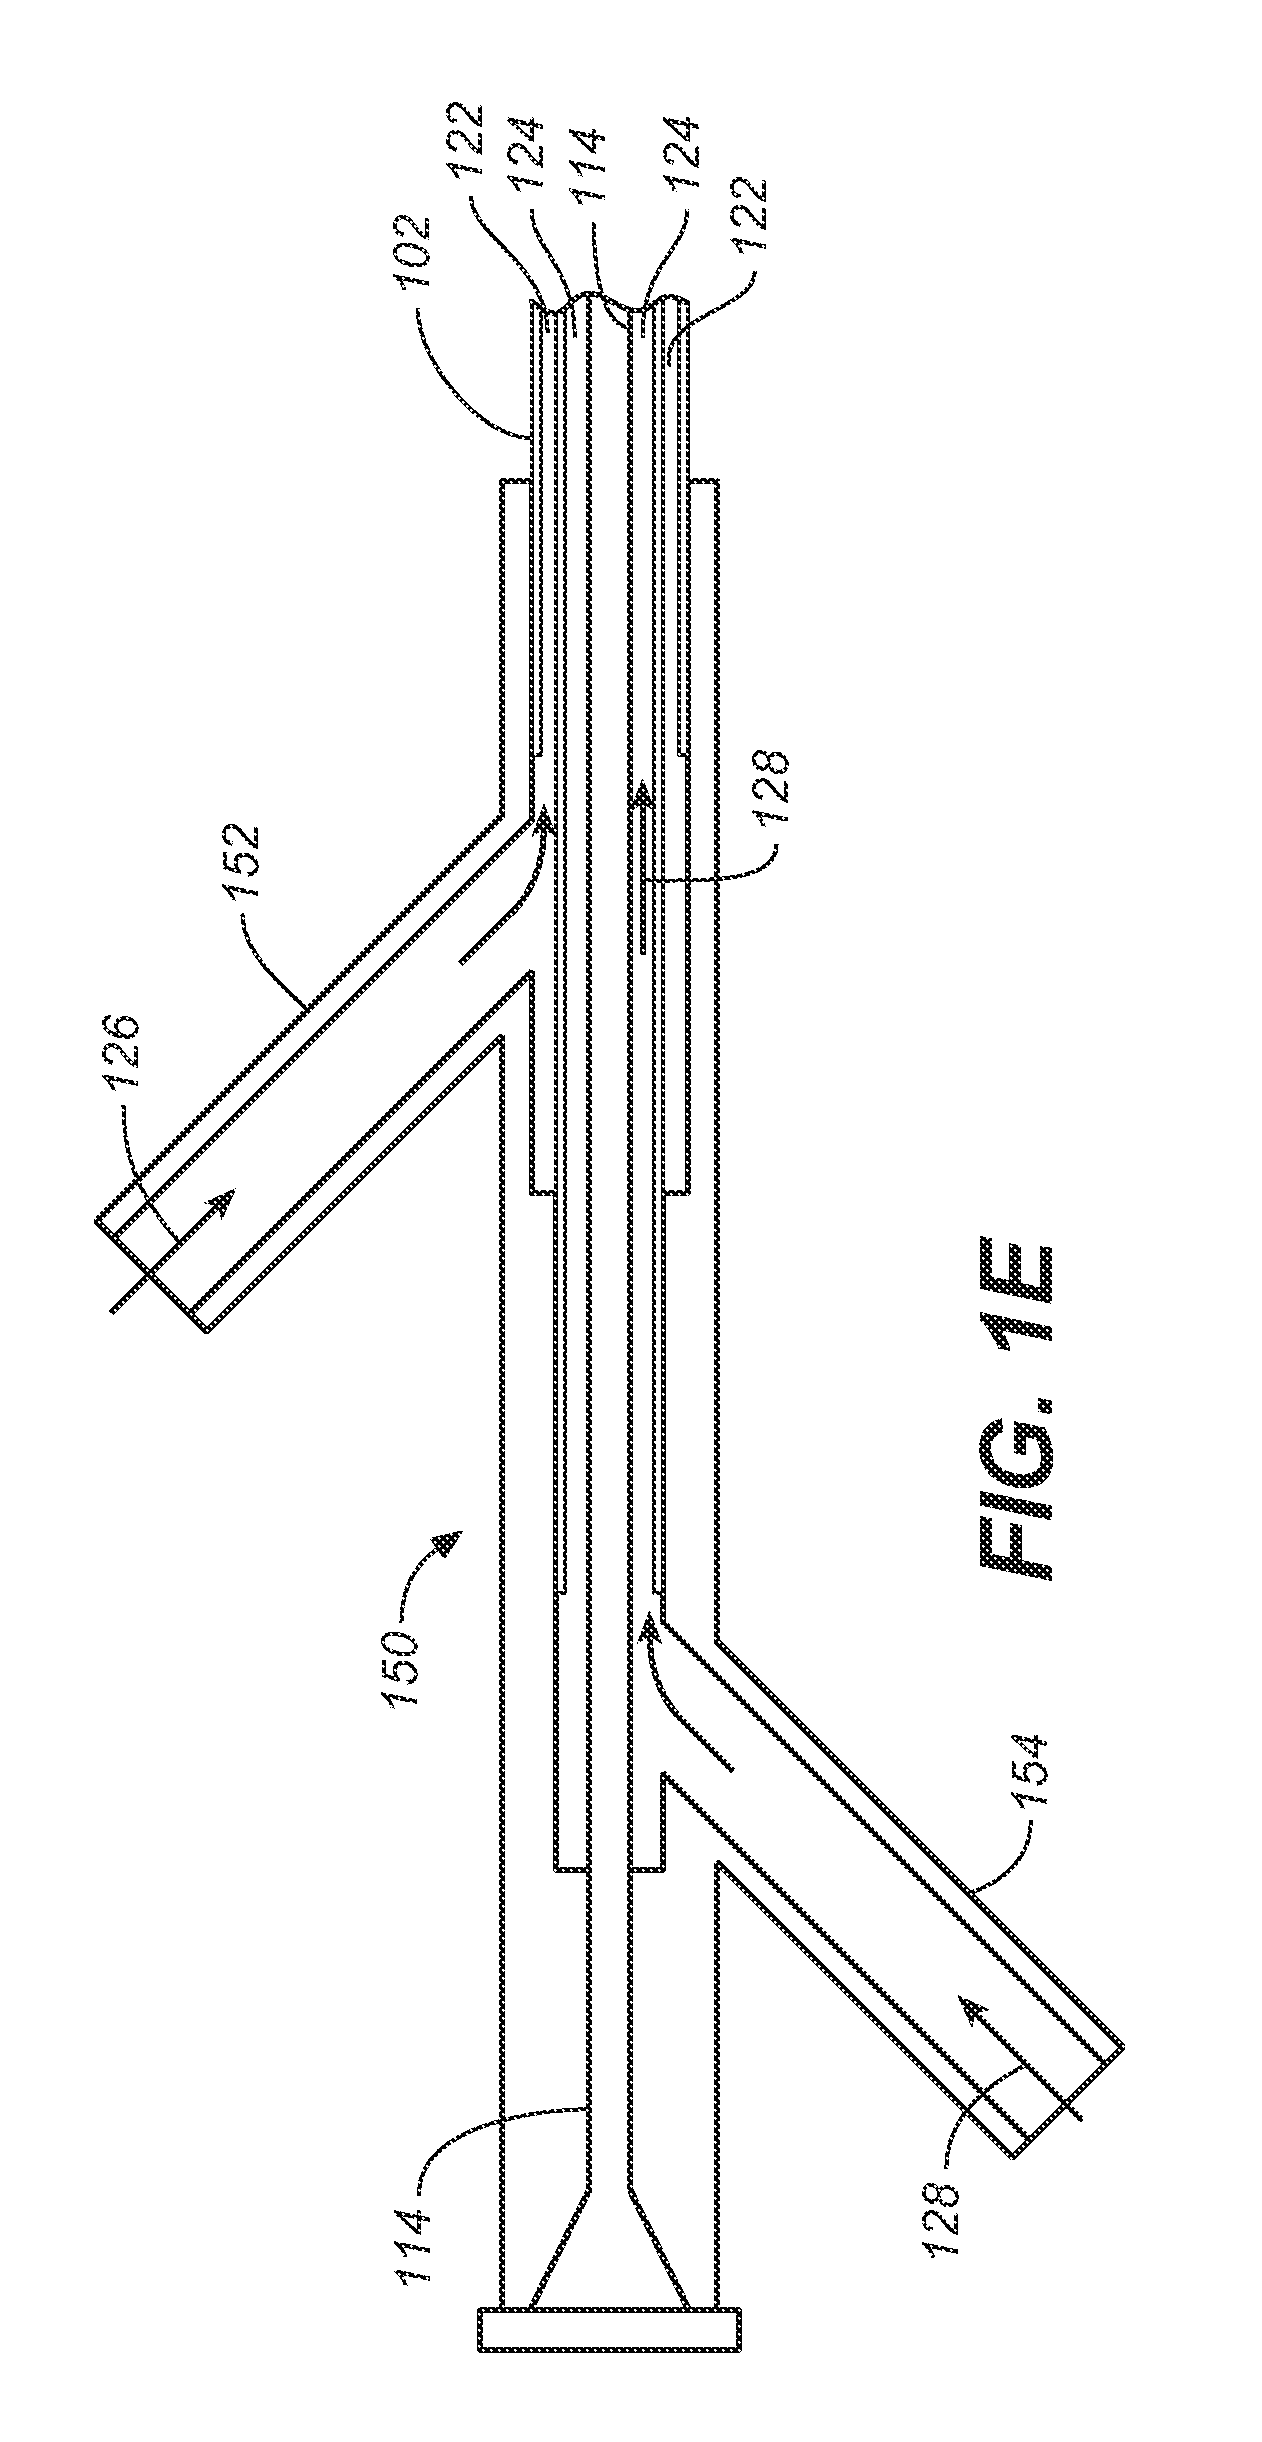 Endolumenal sealant delivery apparatus and methods